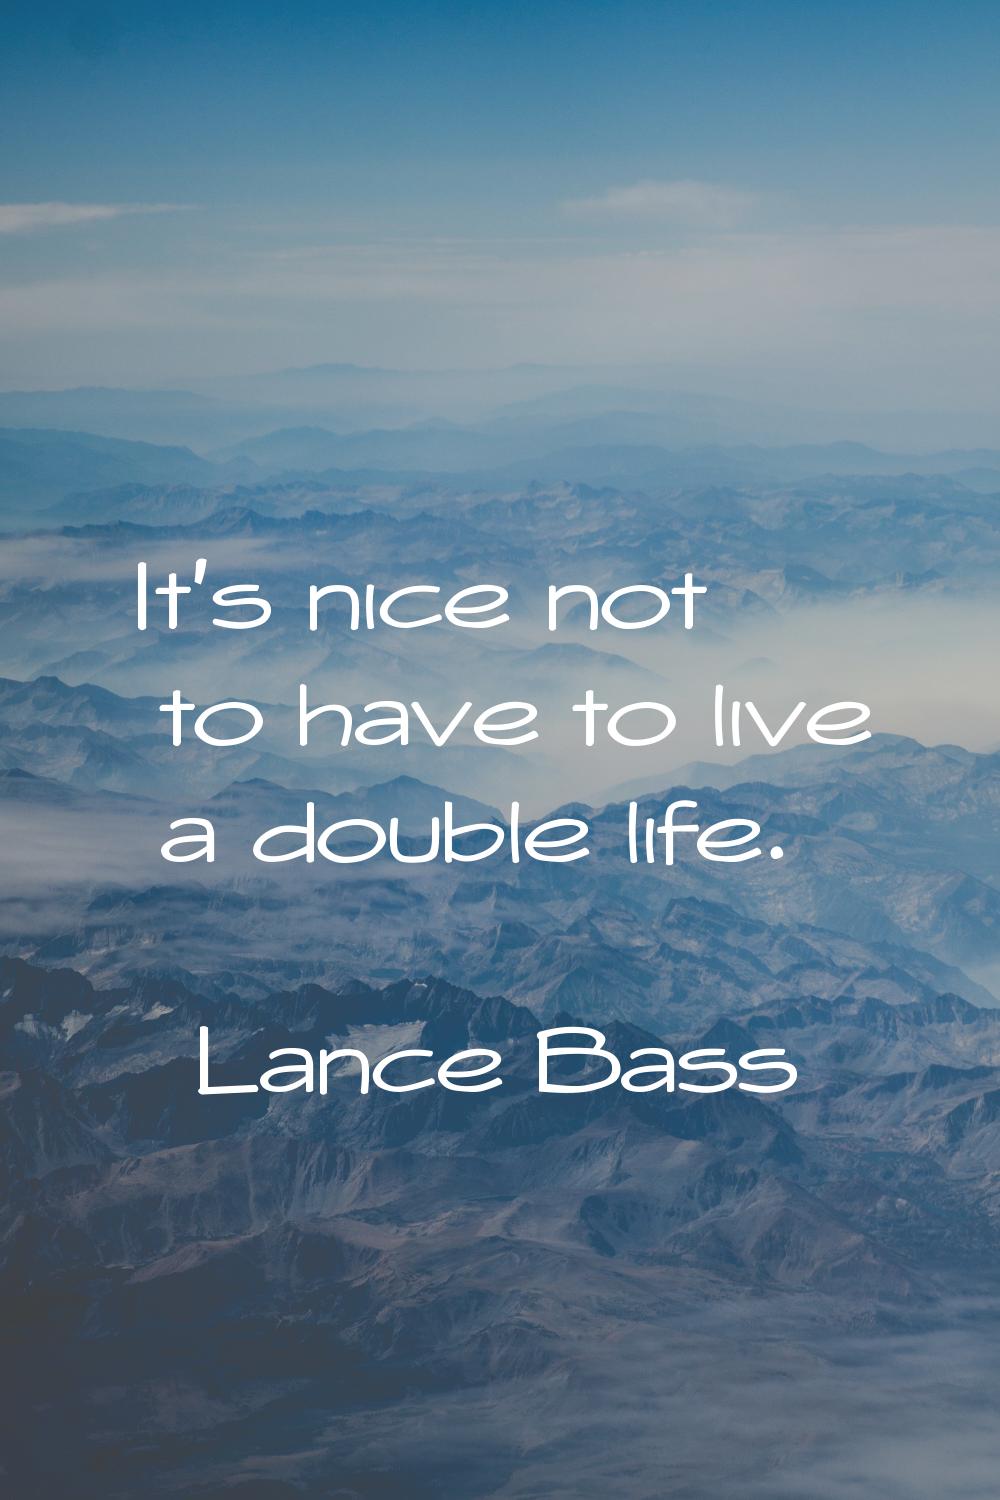 It's nice not to have to live a double life.